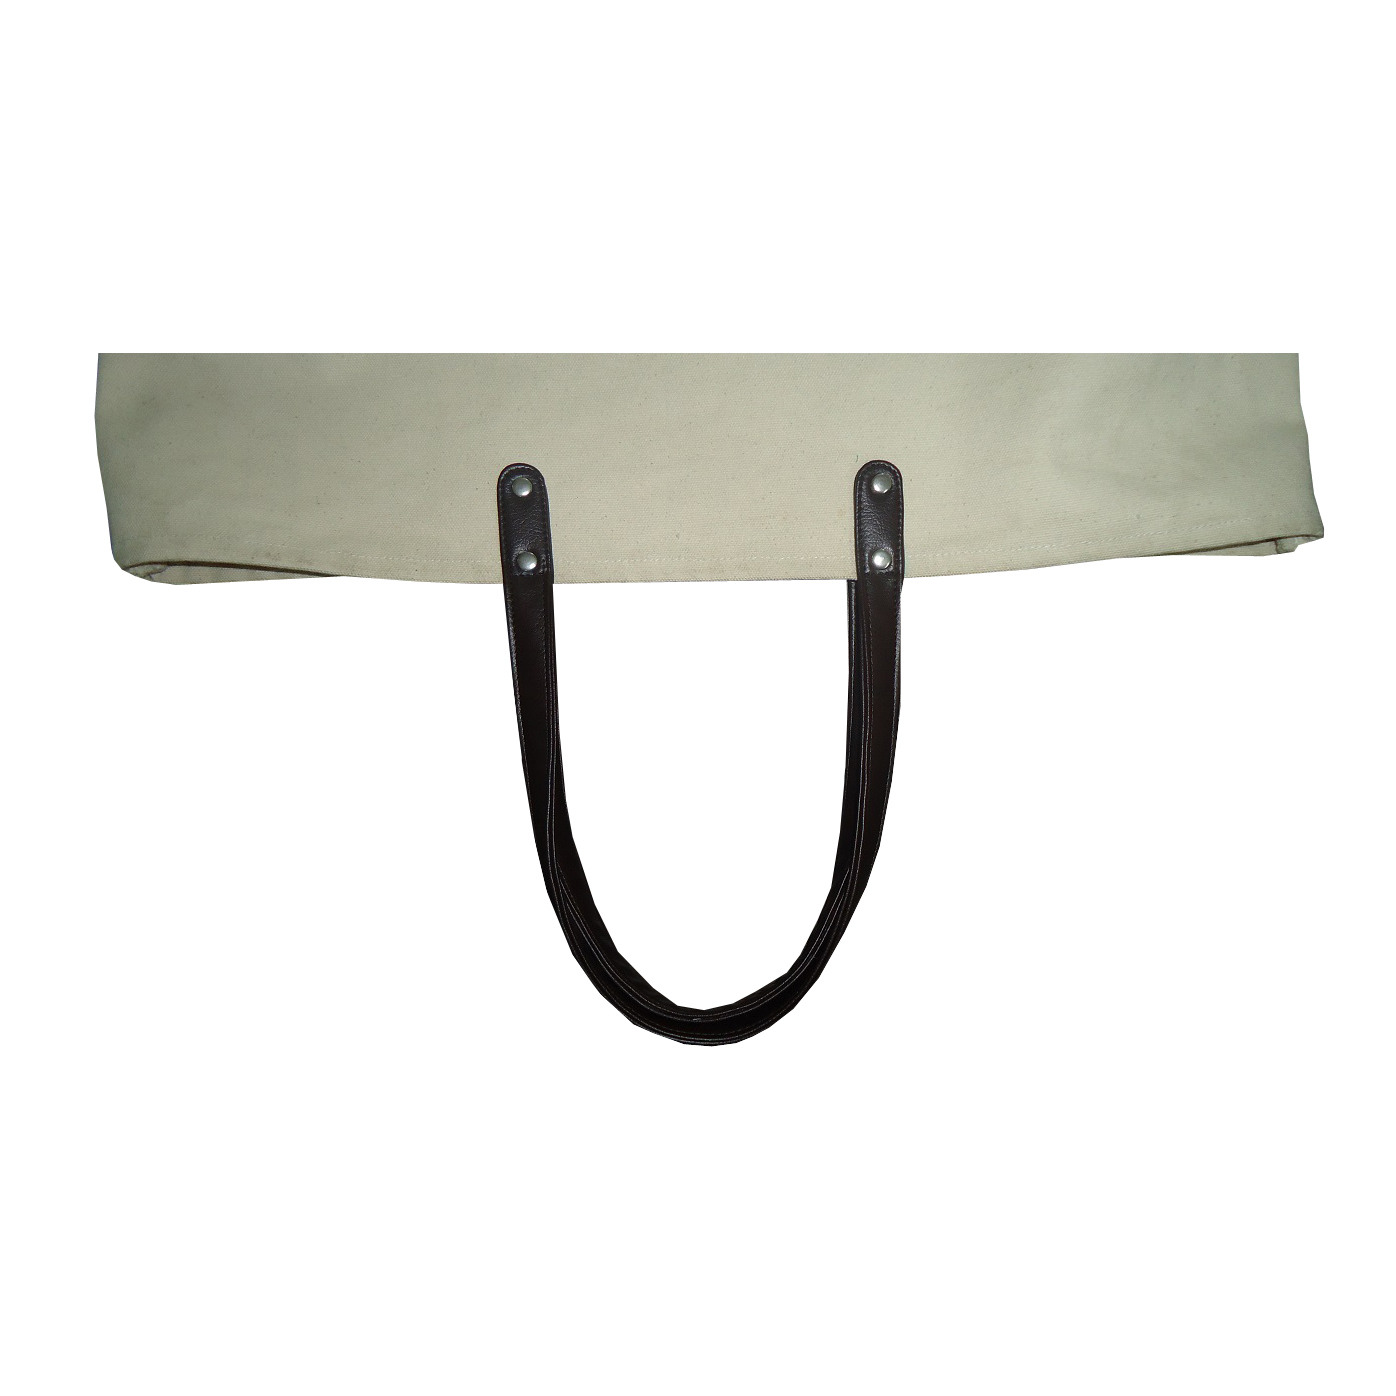 Natural Canvas Bag With Leather Handle